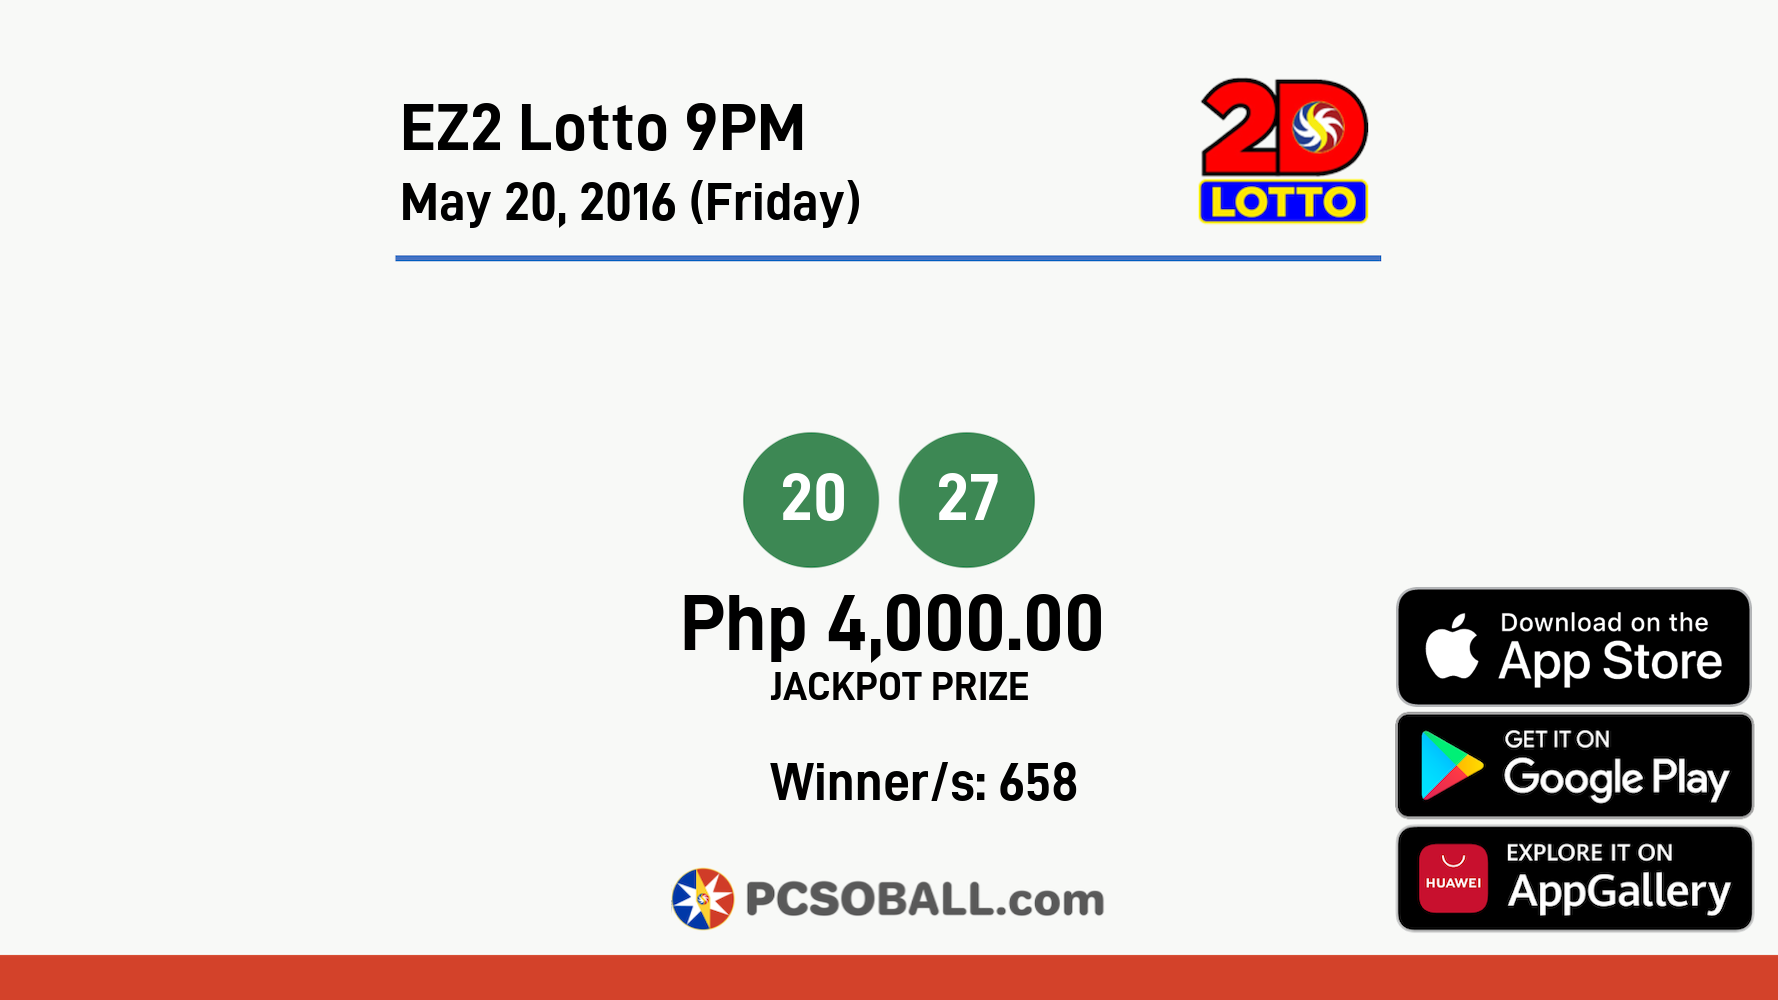 EZ2 Lotto 9PM May 20, 2016 (Friday) Result